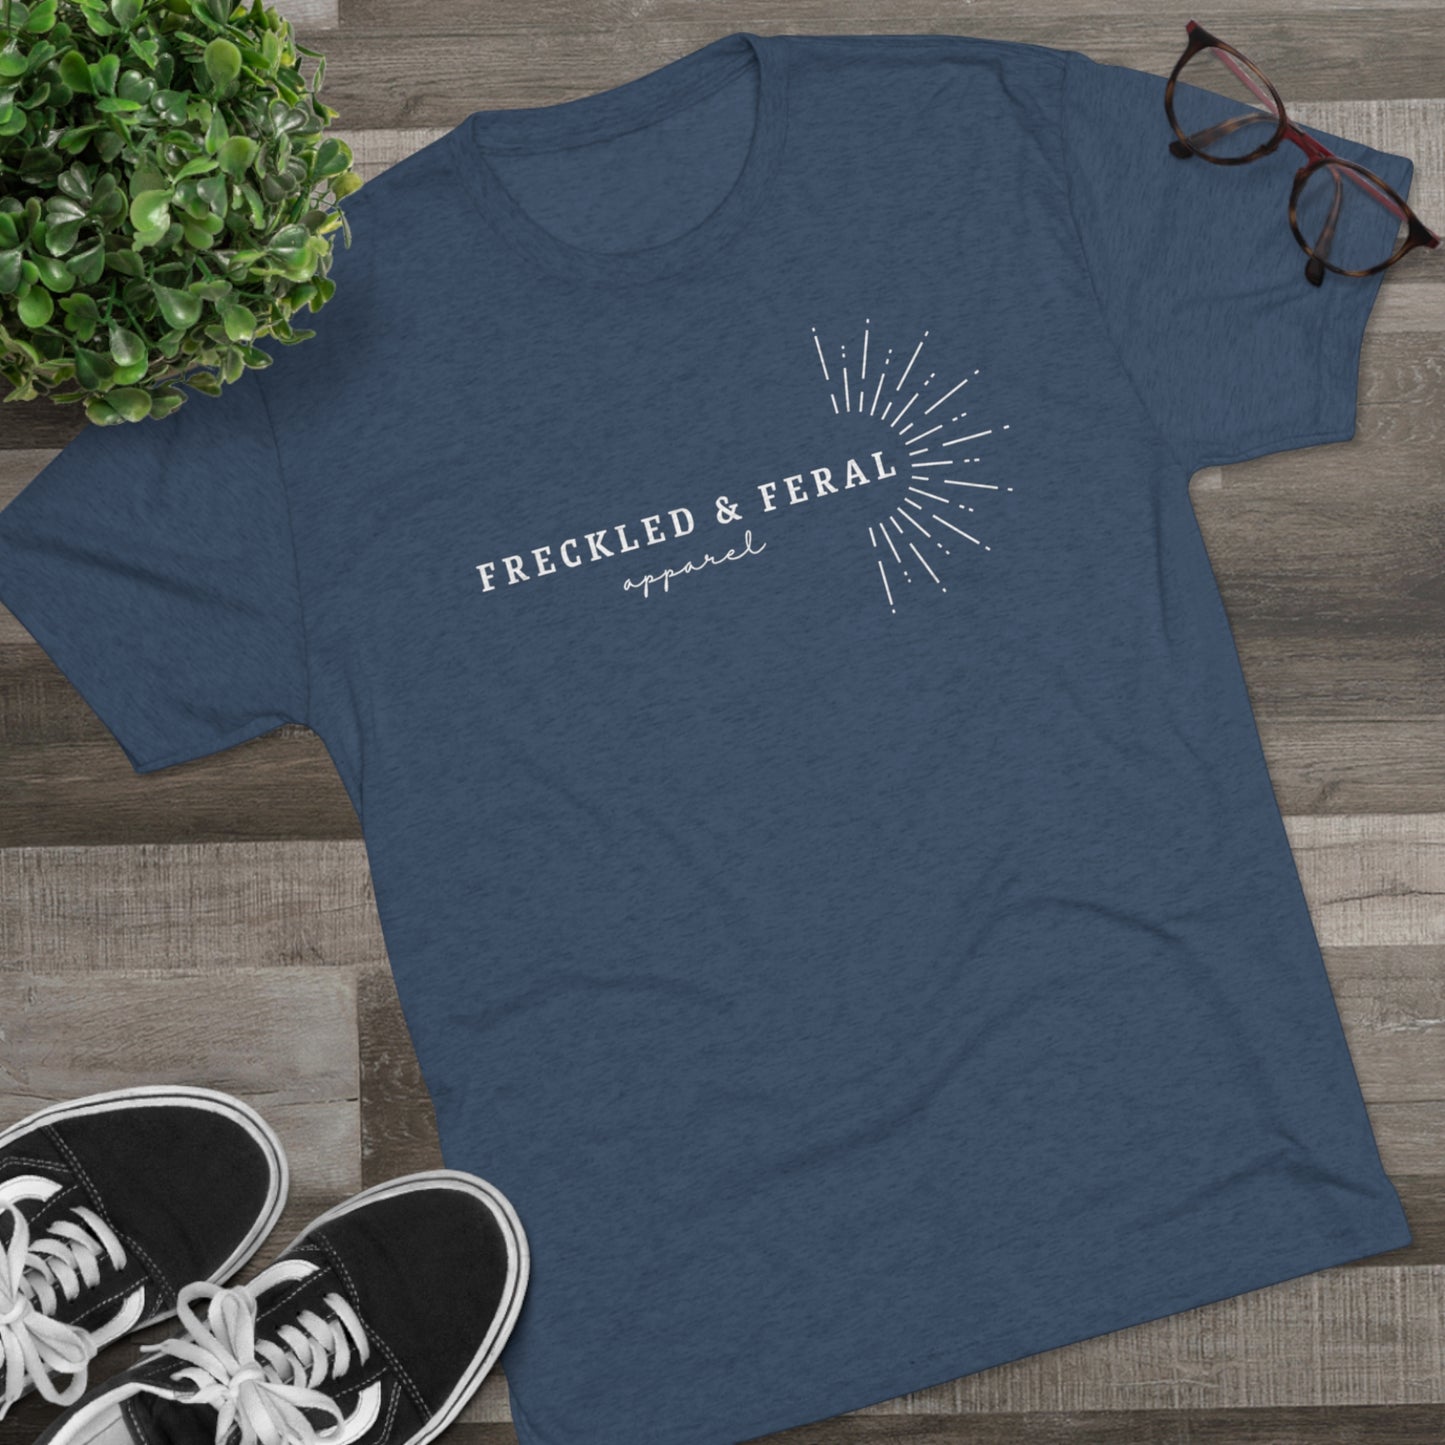 Freckled and Feral Unisex Soft T-Shirt